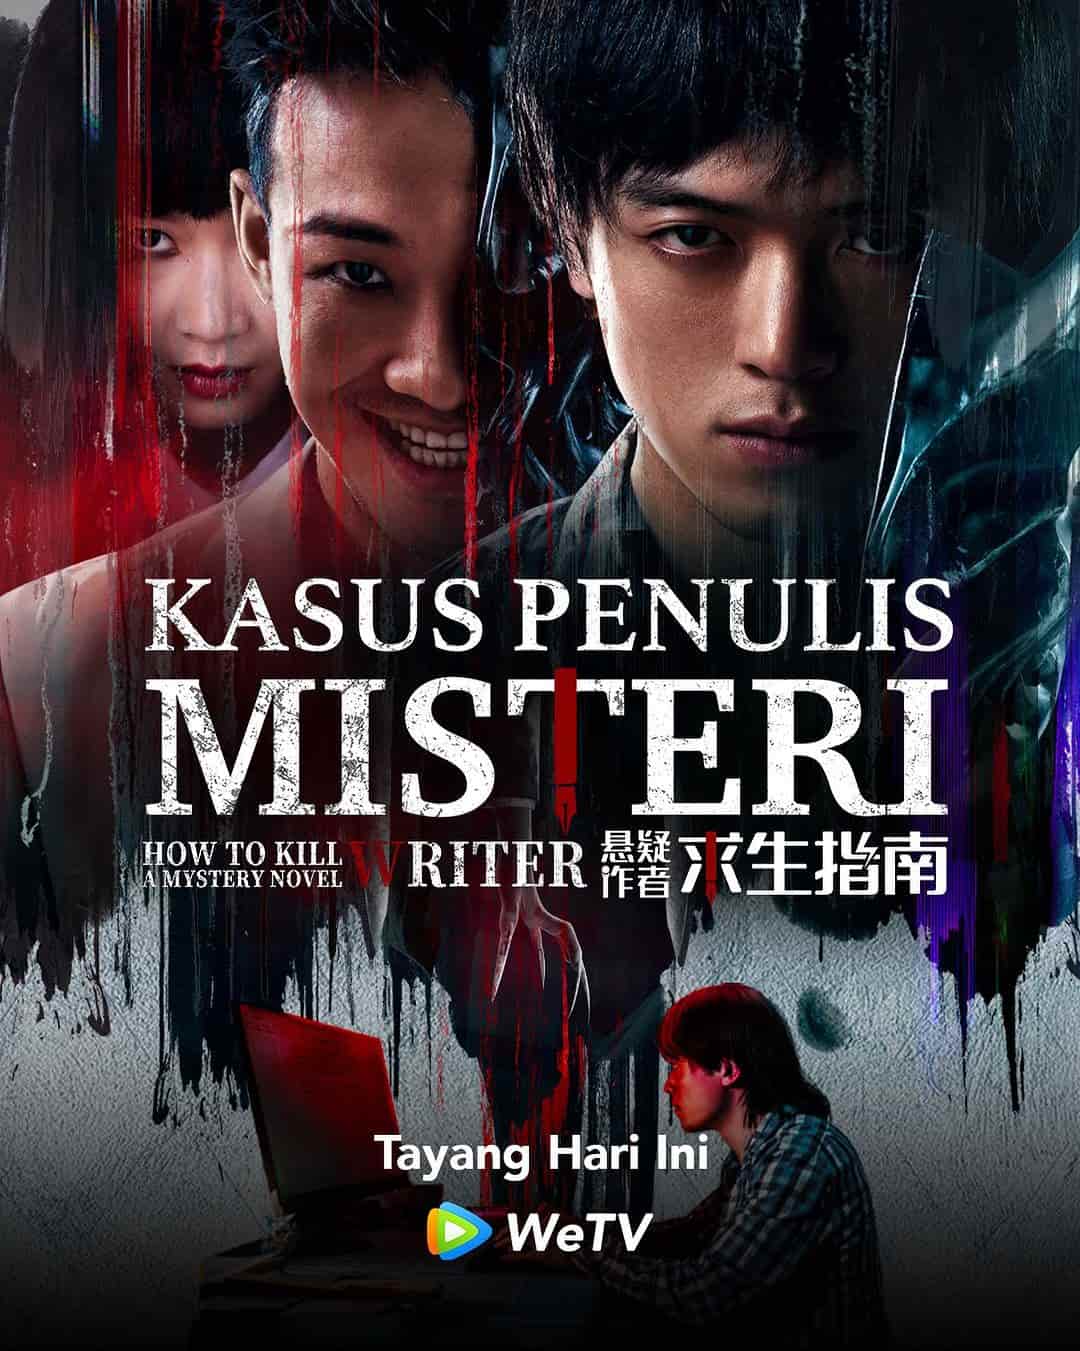 How To Kill A Mystery Novel Writer - Sinopsis, Pemain, OST, Episode, Review